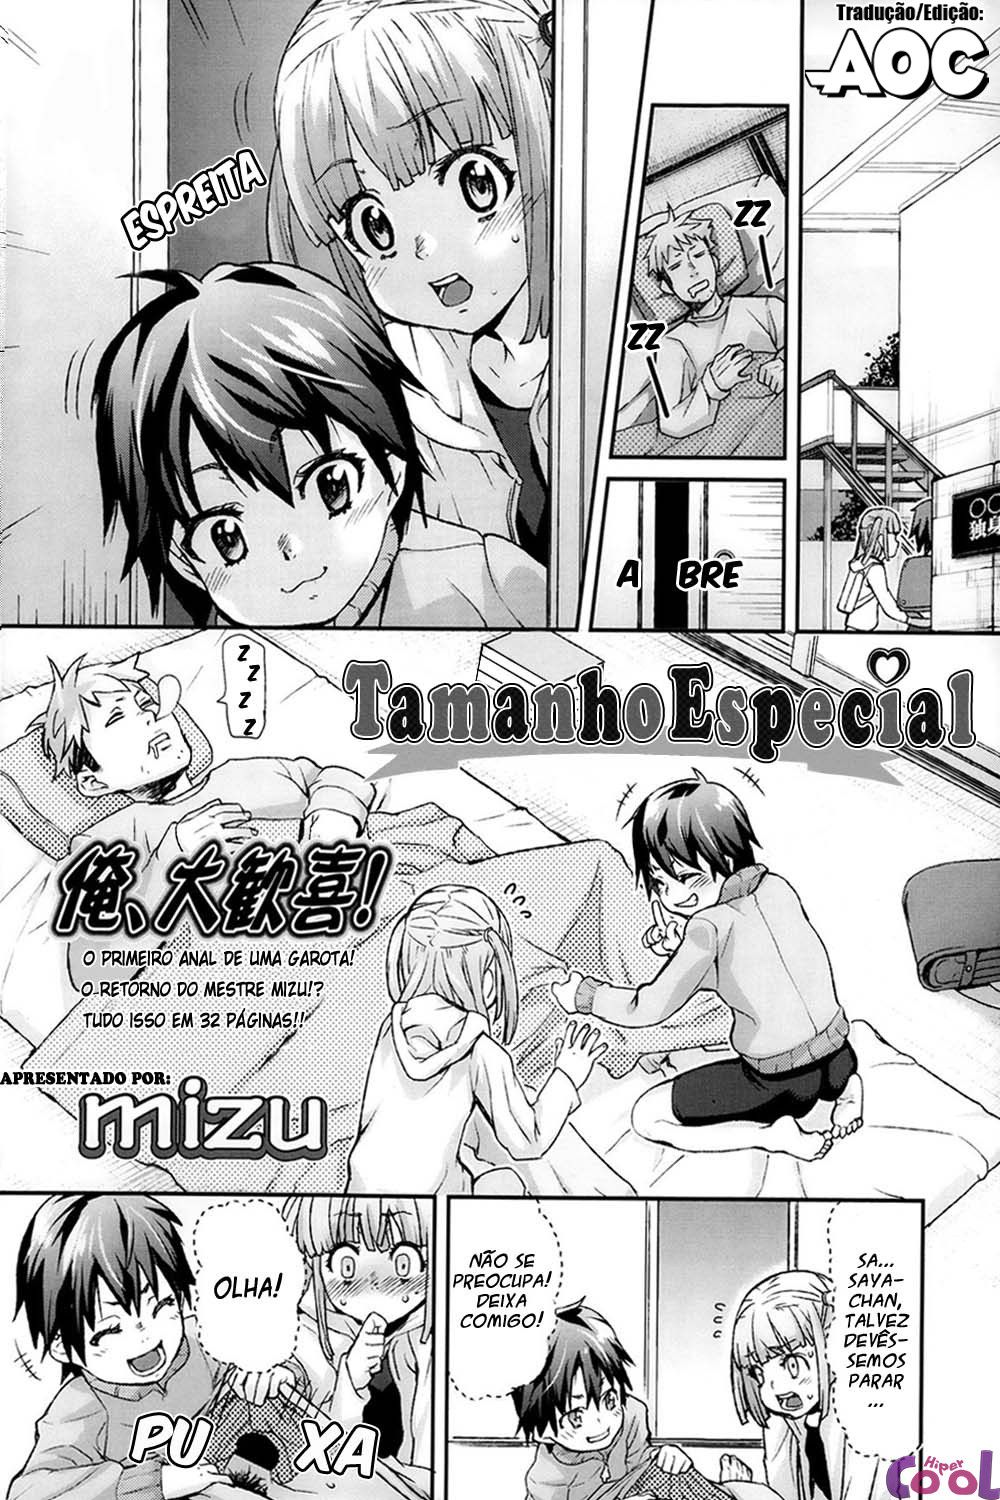 special-size--chapter-01-page-01.jpg